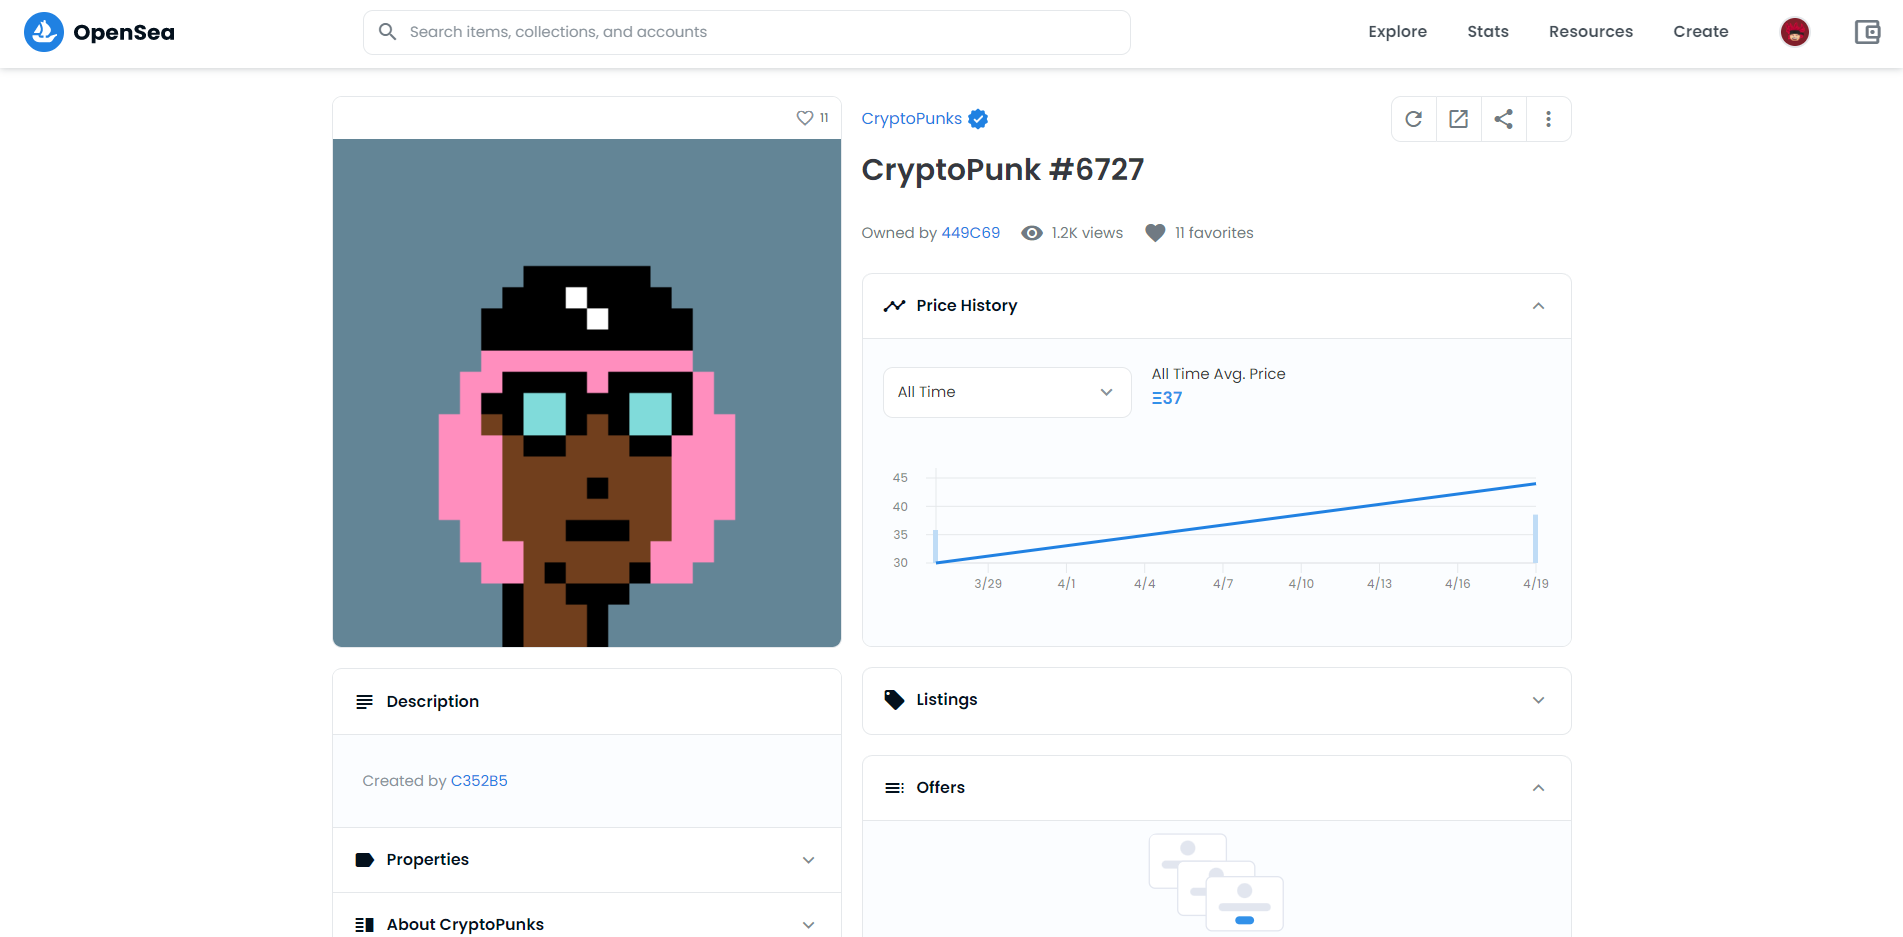 How to Buy Cryptopunks - A Step-by-Step Guide